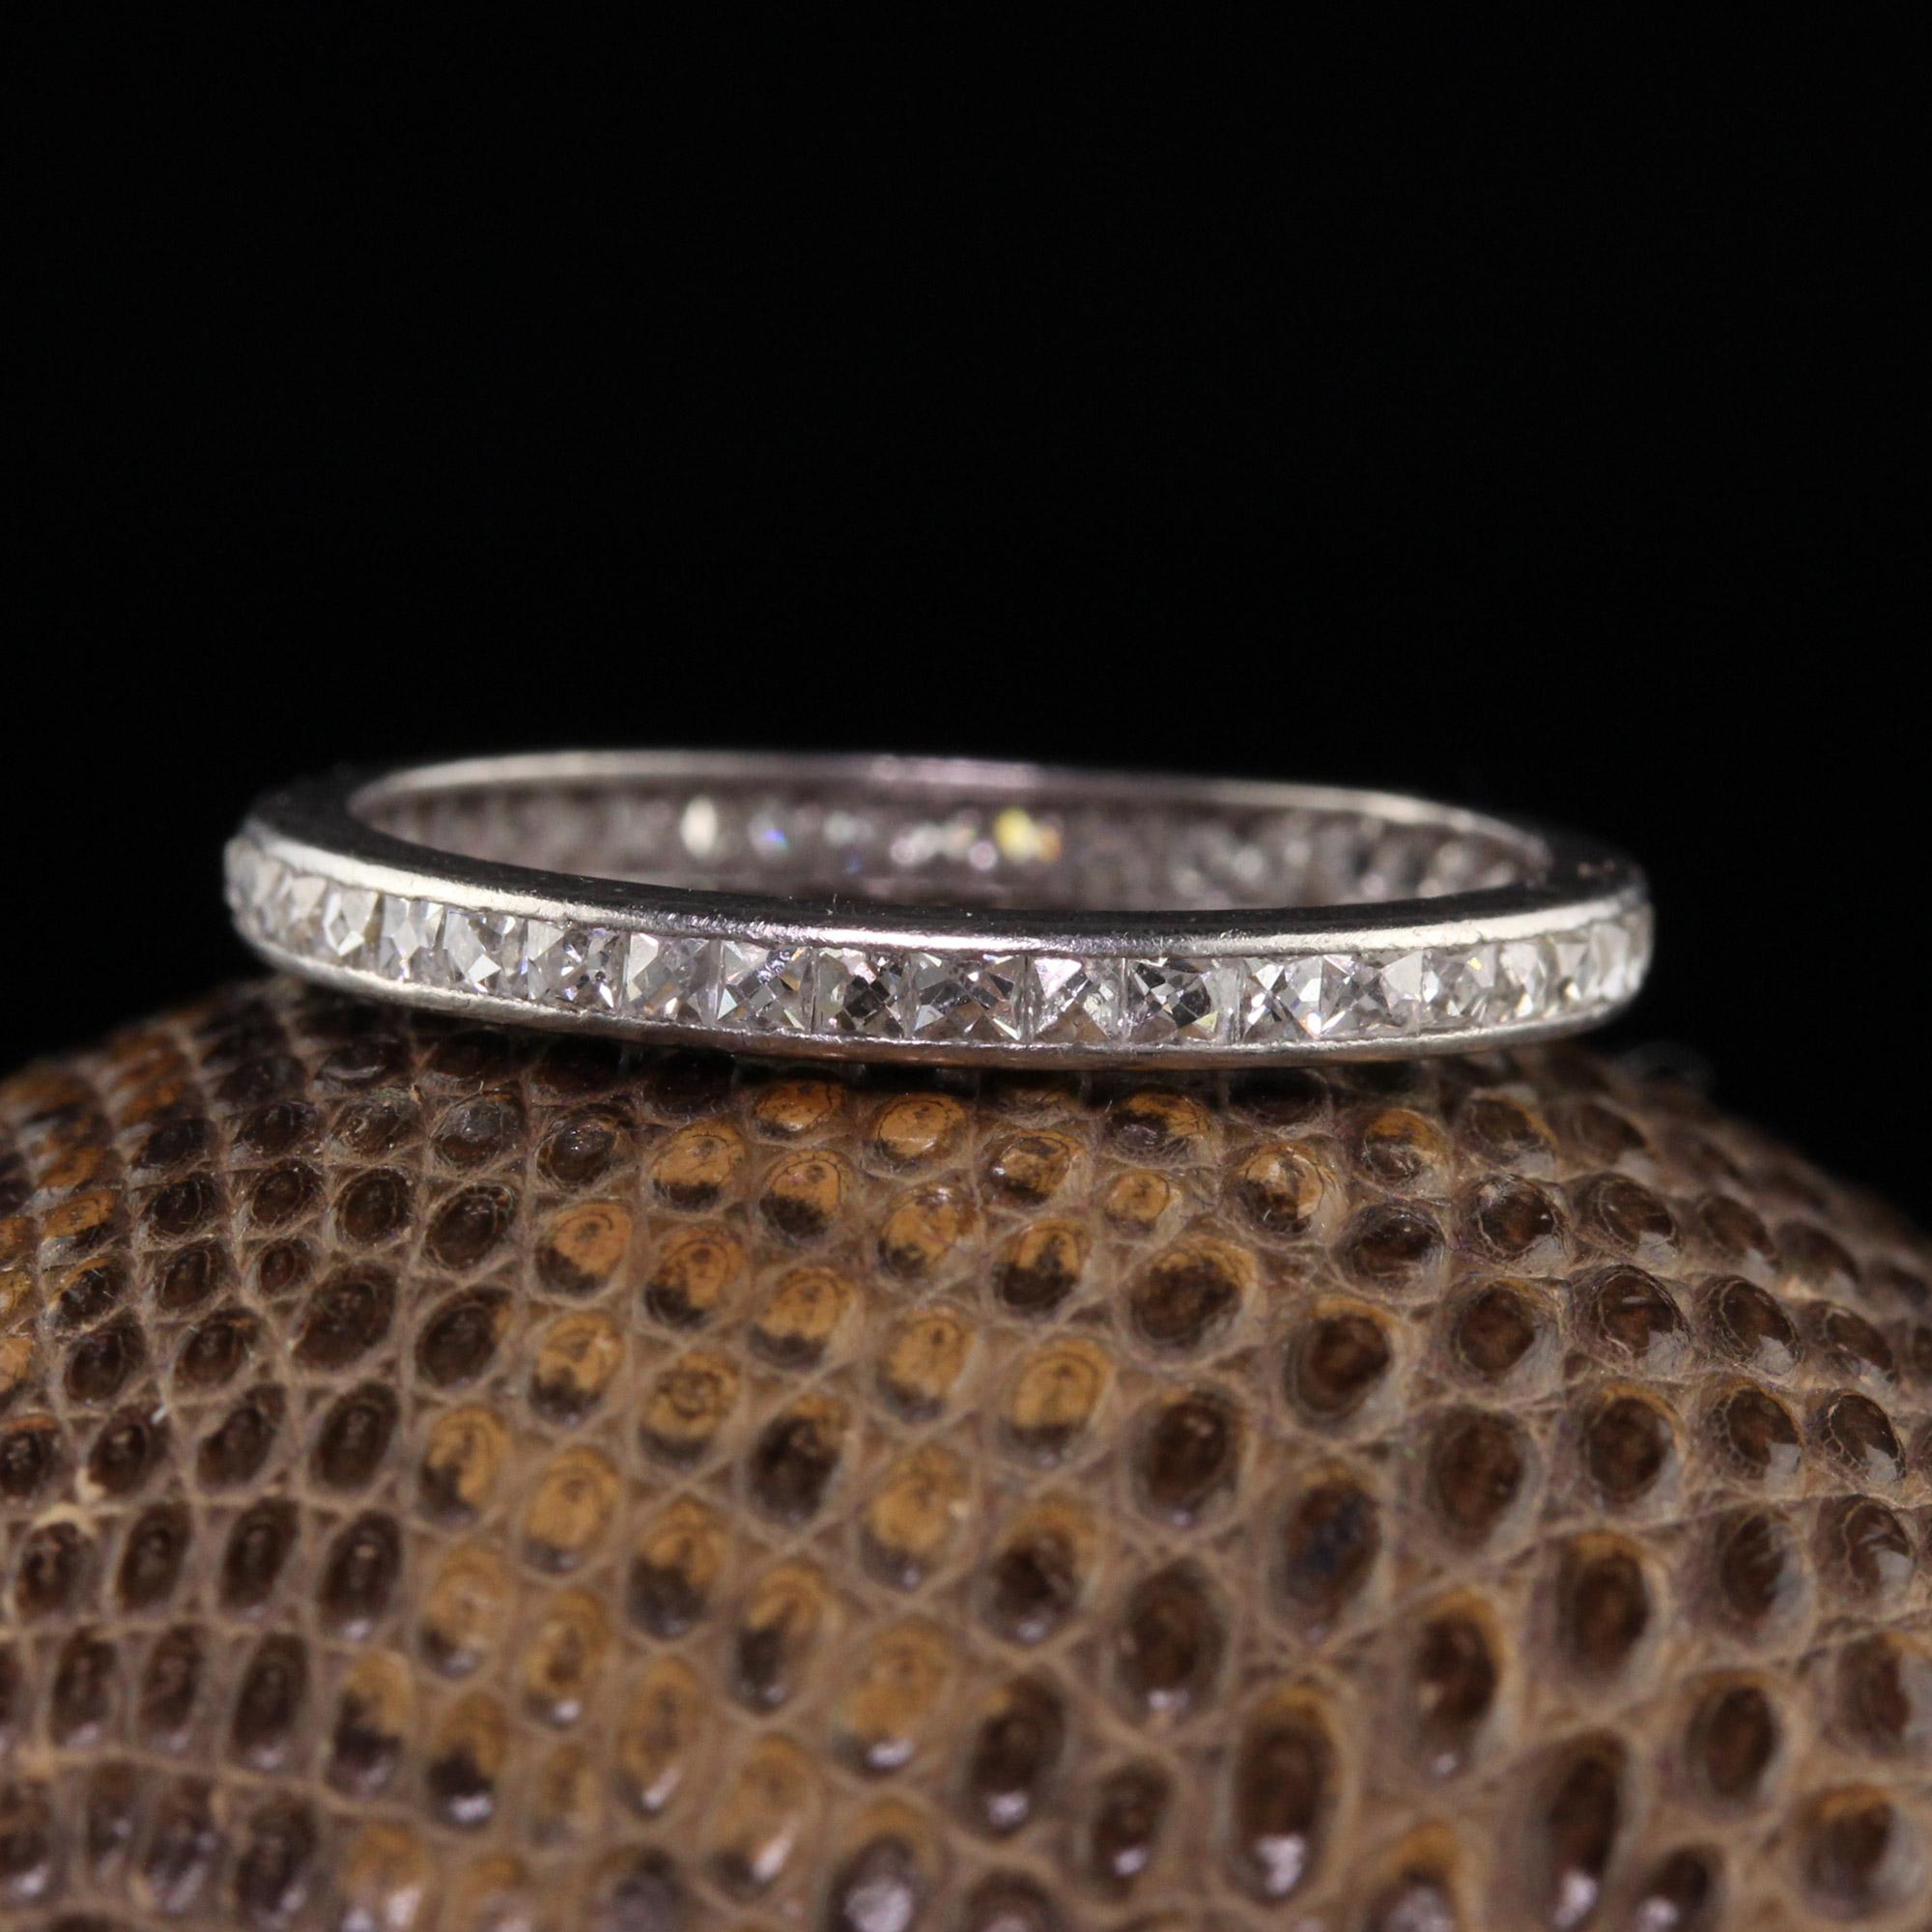 Beautiful Antique Art Deco Platinum French Cut Diamond Eternity Band - Size 5. This gorgeous eternity band is crafted in platinum. There are french cut diamonds going around the entire band with two of the stones replaced with antique carre cut